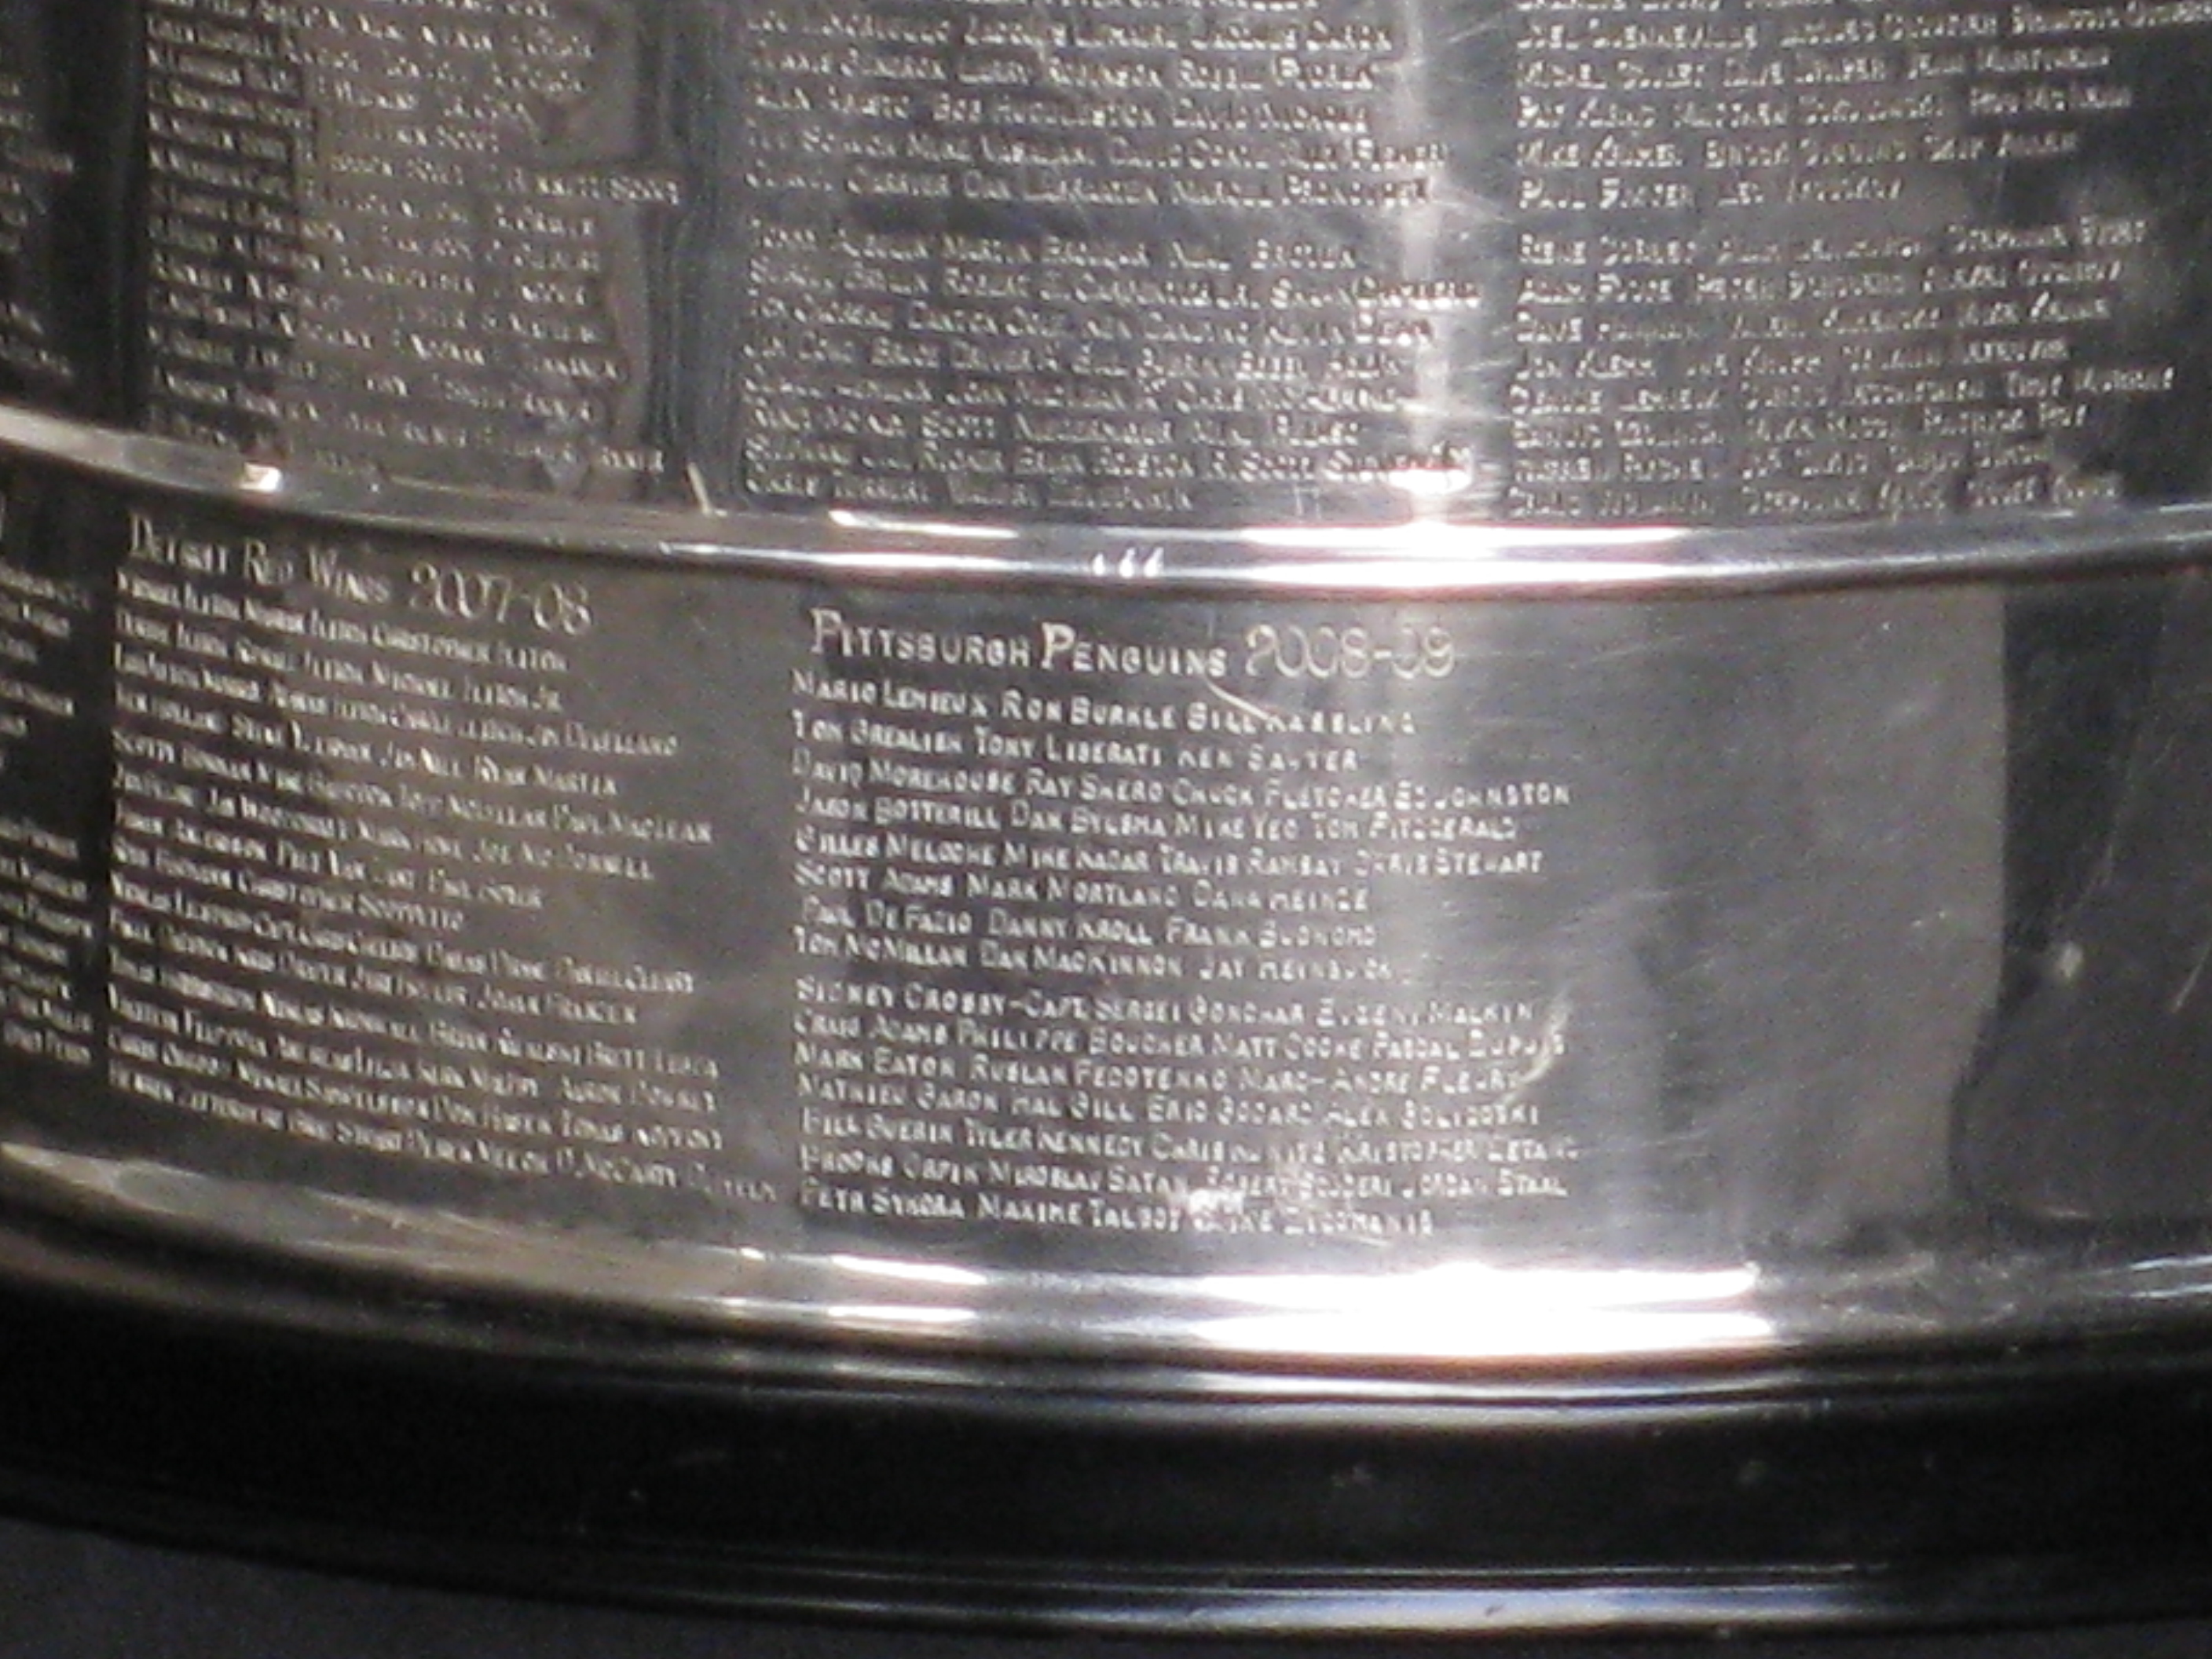 https://upload.wikimedia.org/wikipedia/commons/b/ba/Stanley_Cup_Pittsburgh_2008-09_Engraved.jpg